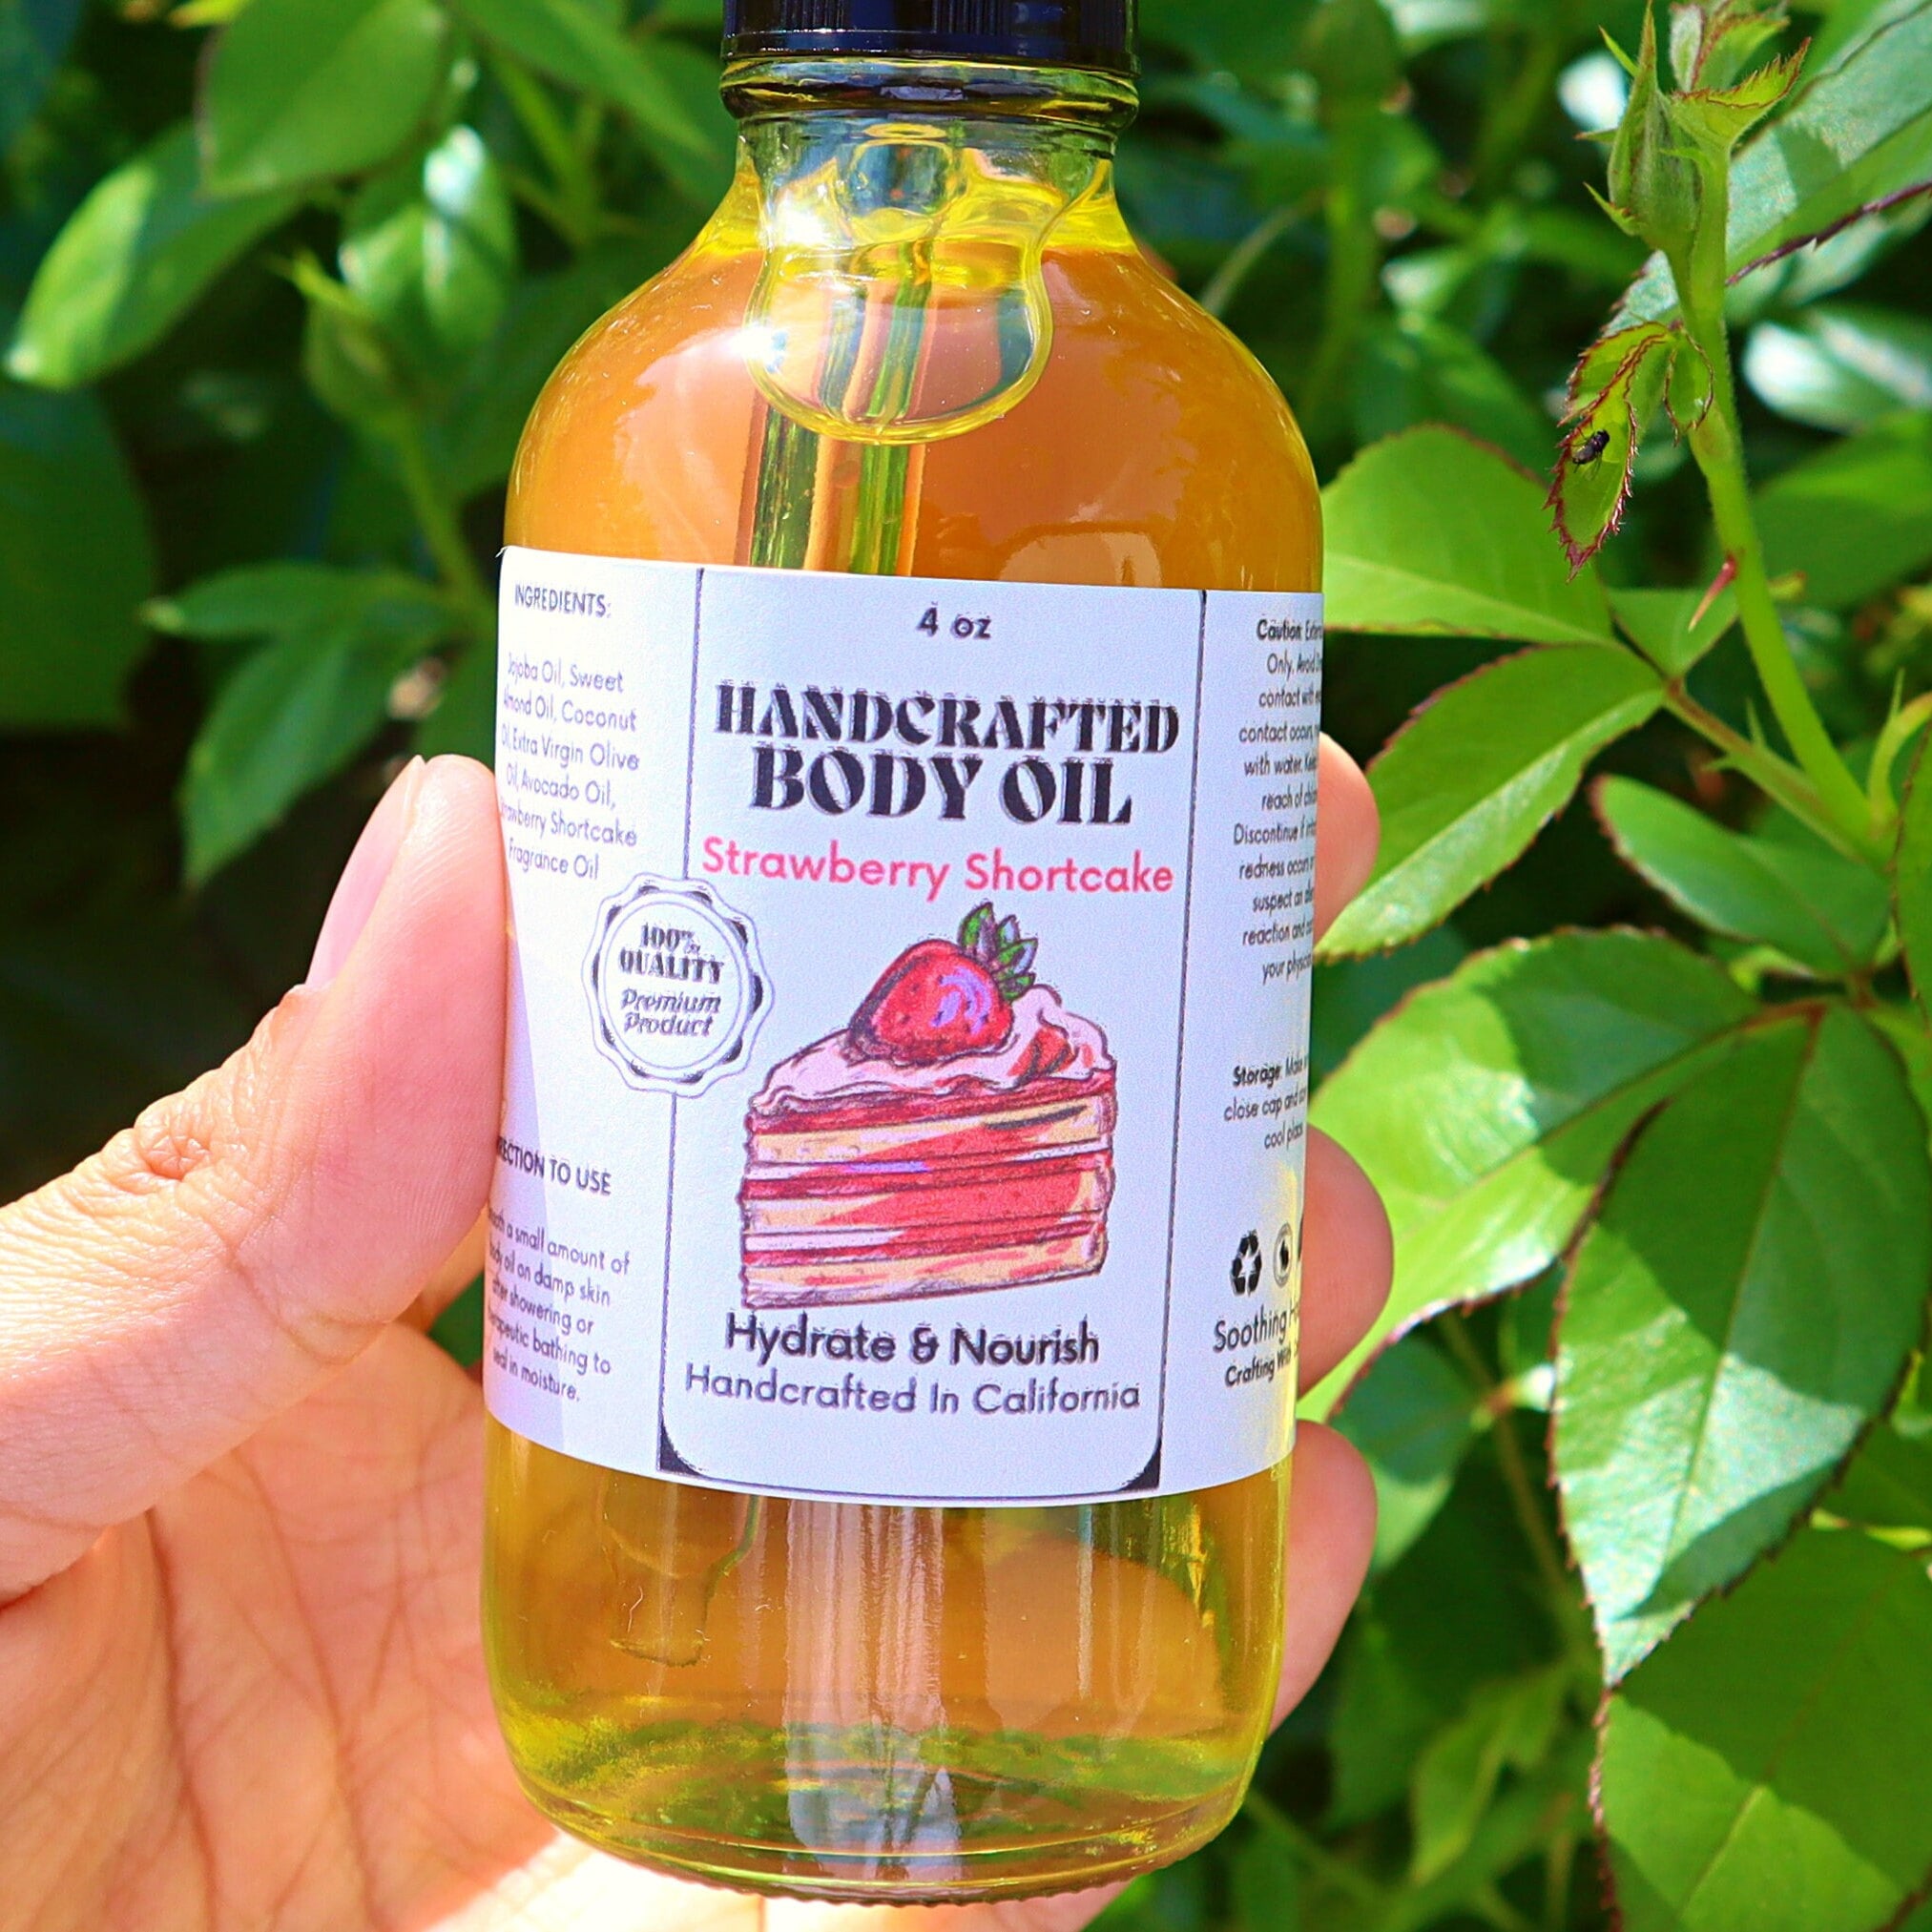 Wait, what's this? Strawberry Shortcake Body Oil? Experience the sweet